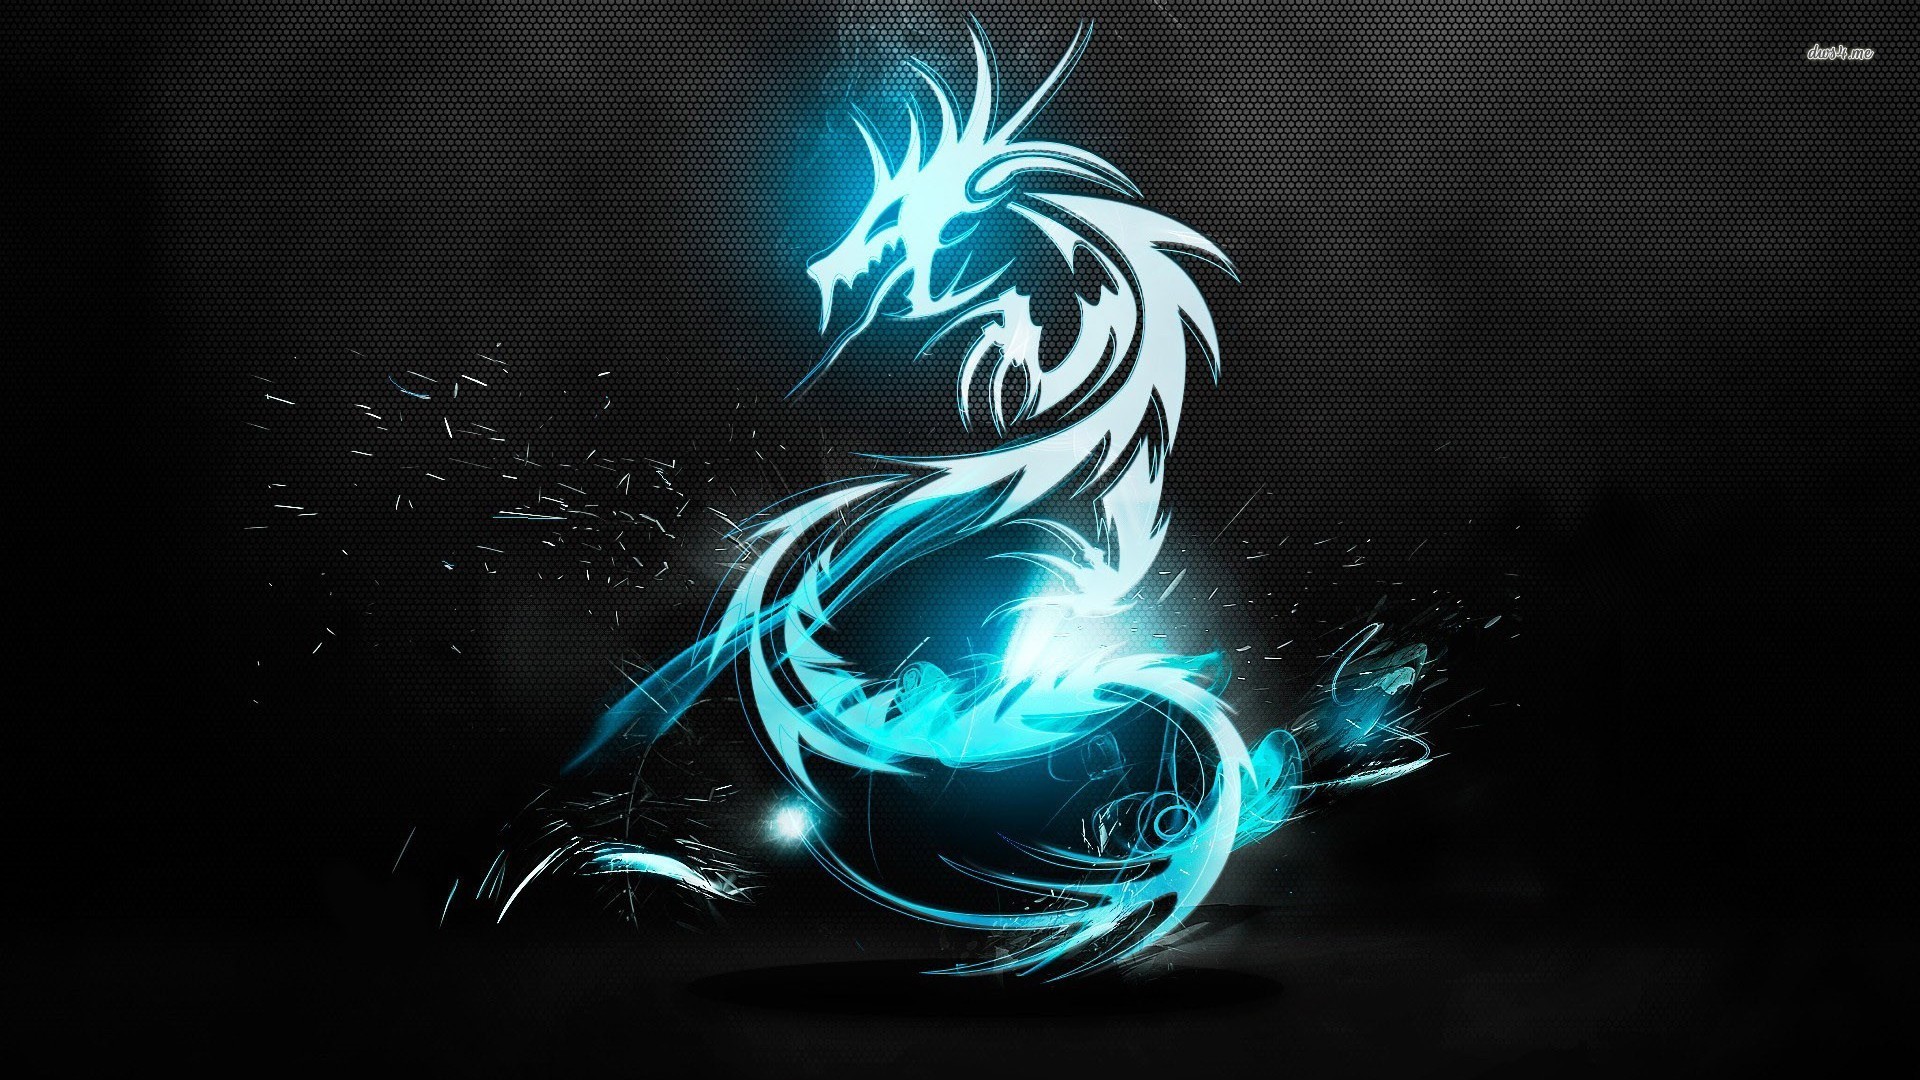 1920x1080 Collection of Download Dragon Wallpaper on Spyder Wallpapers